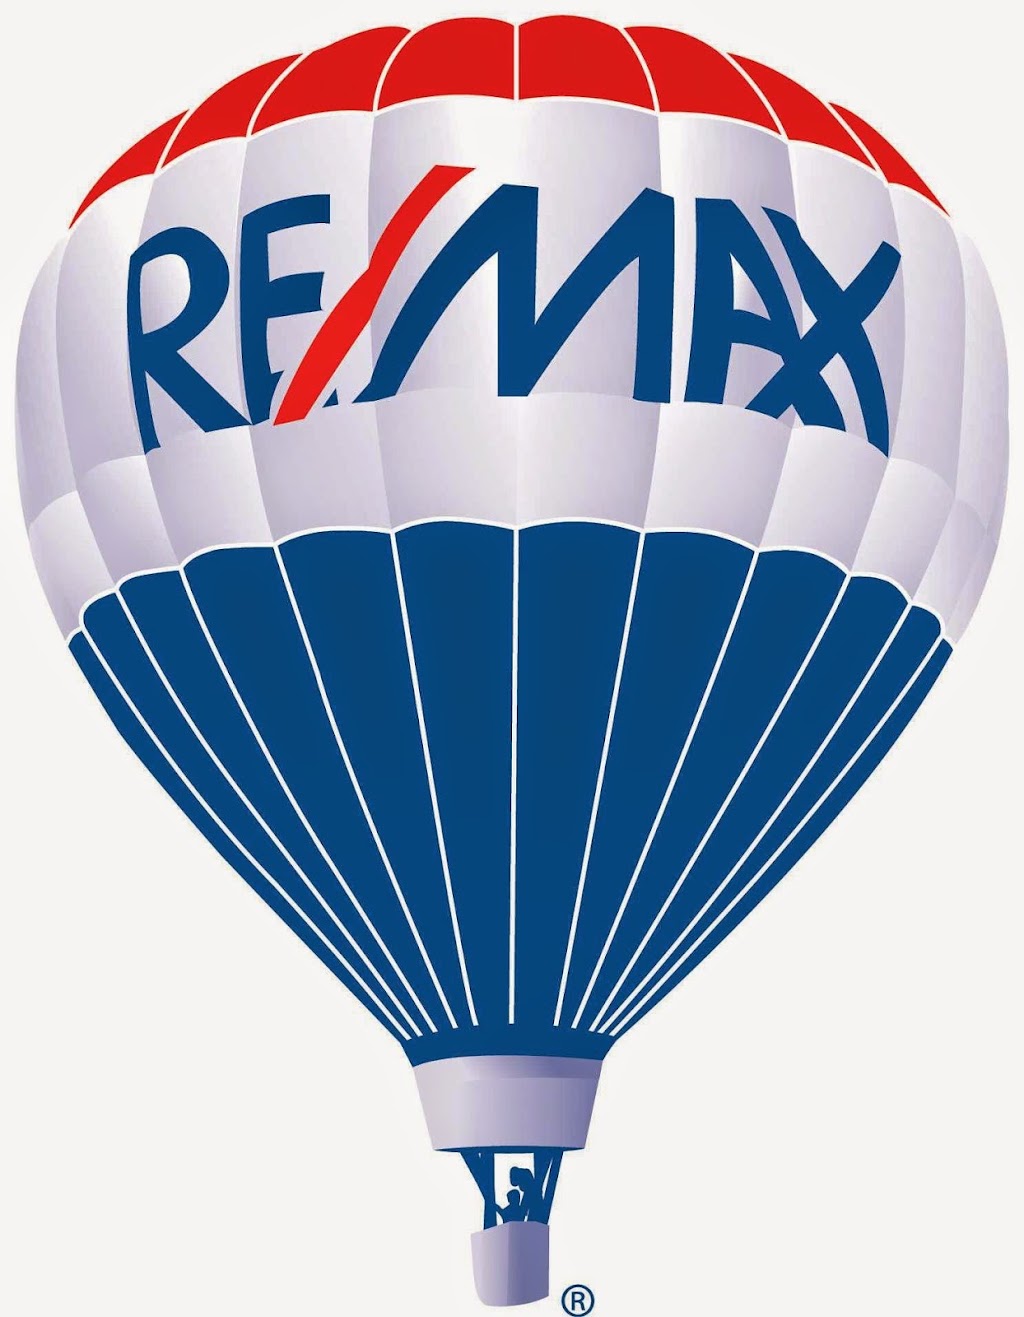 RE/MAX Accord | 313 Sycamore Valley Rd West, Danville, CA 94526, USA | Phone: (925) 838-4100